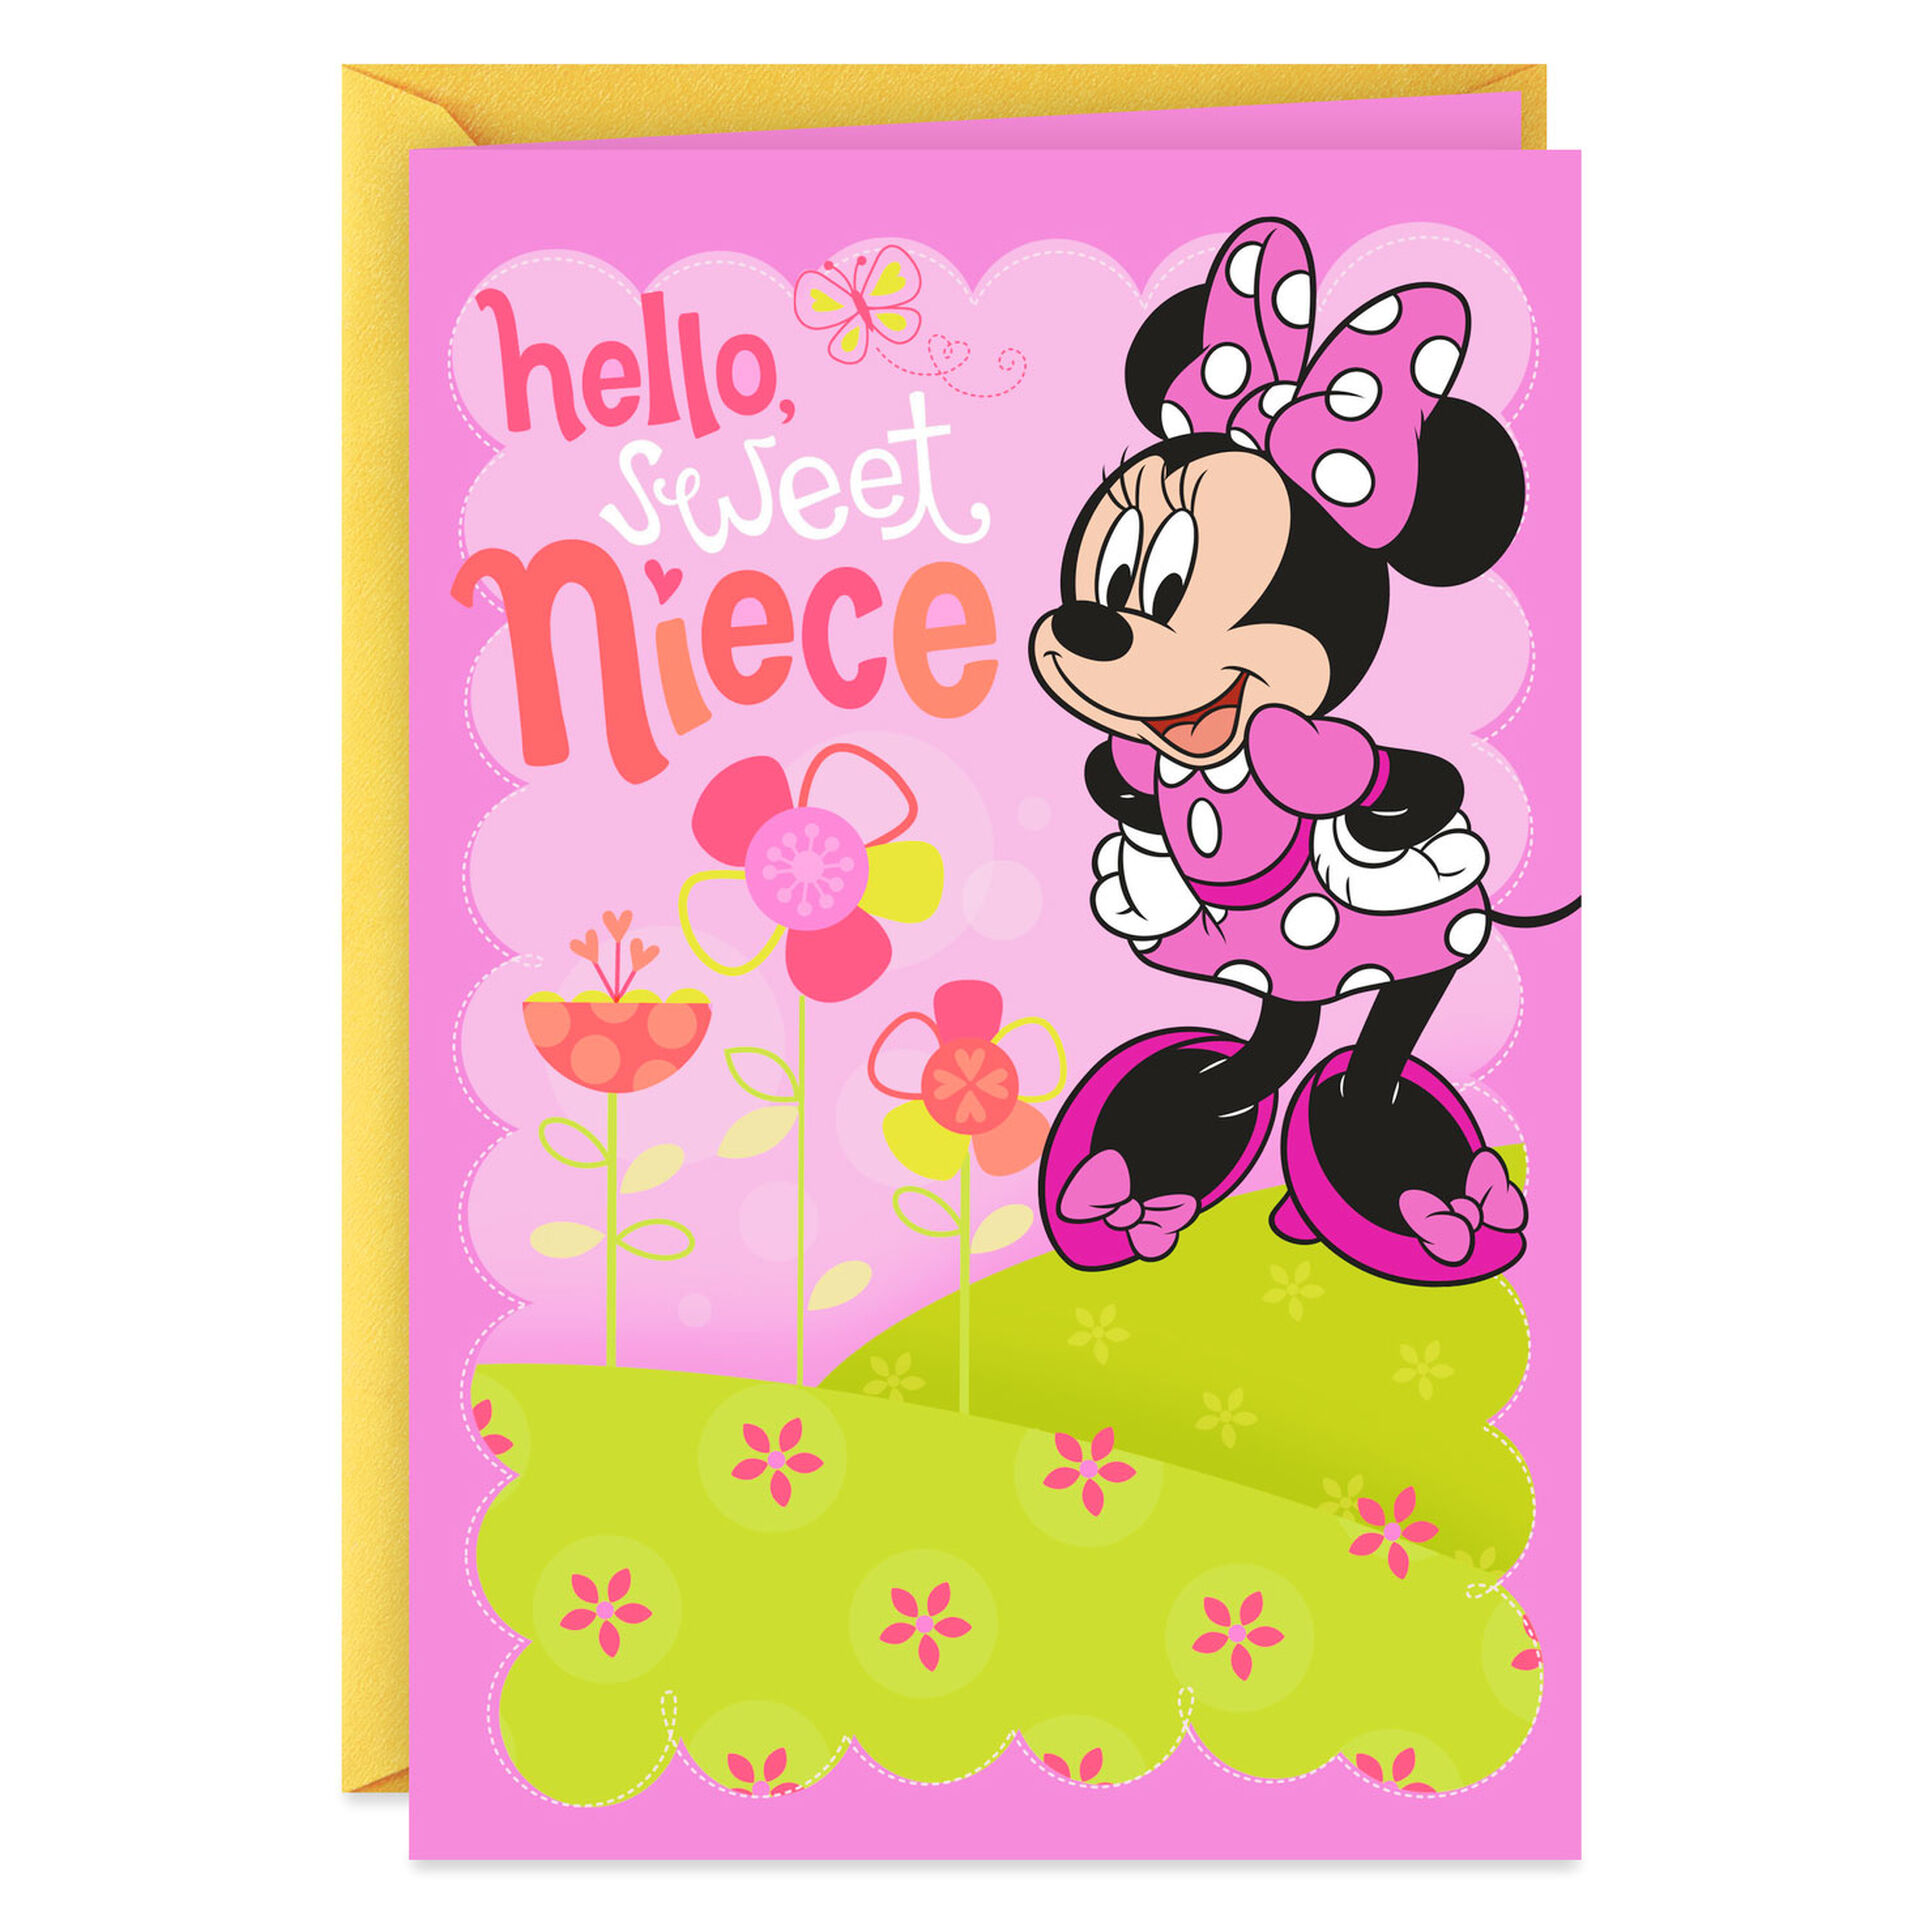 Minnie Mouse Easter Card for Niece - Greeting Cards - Hallmark